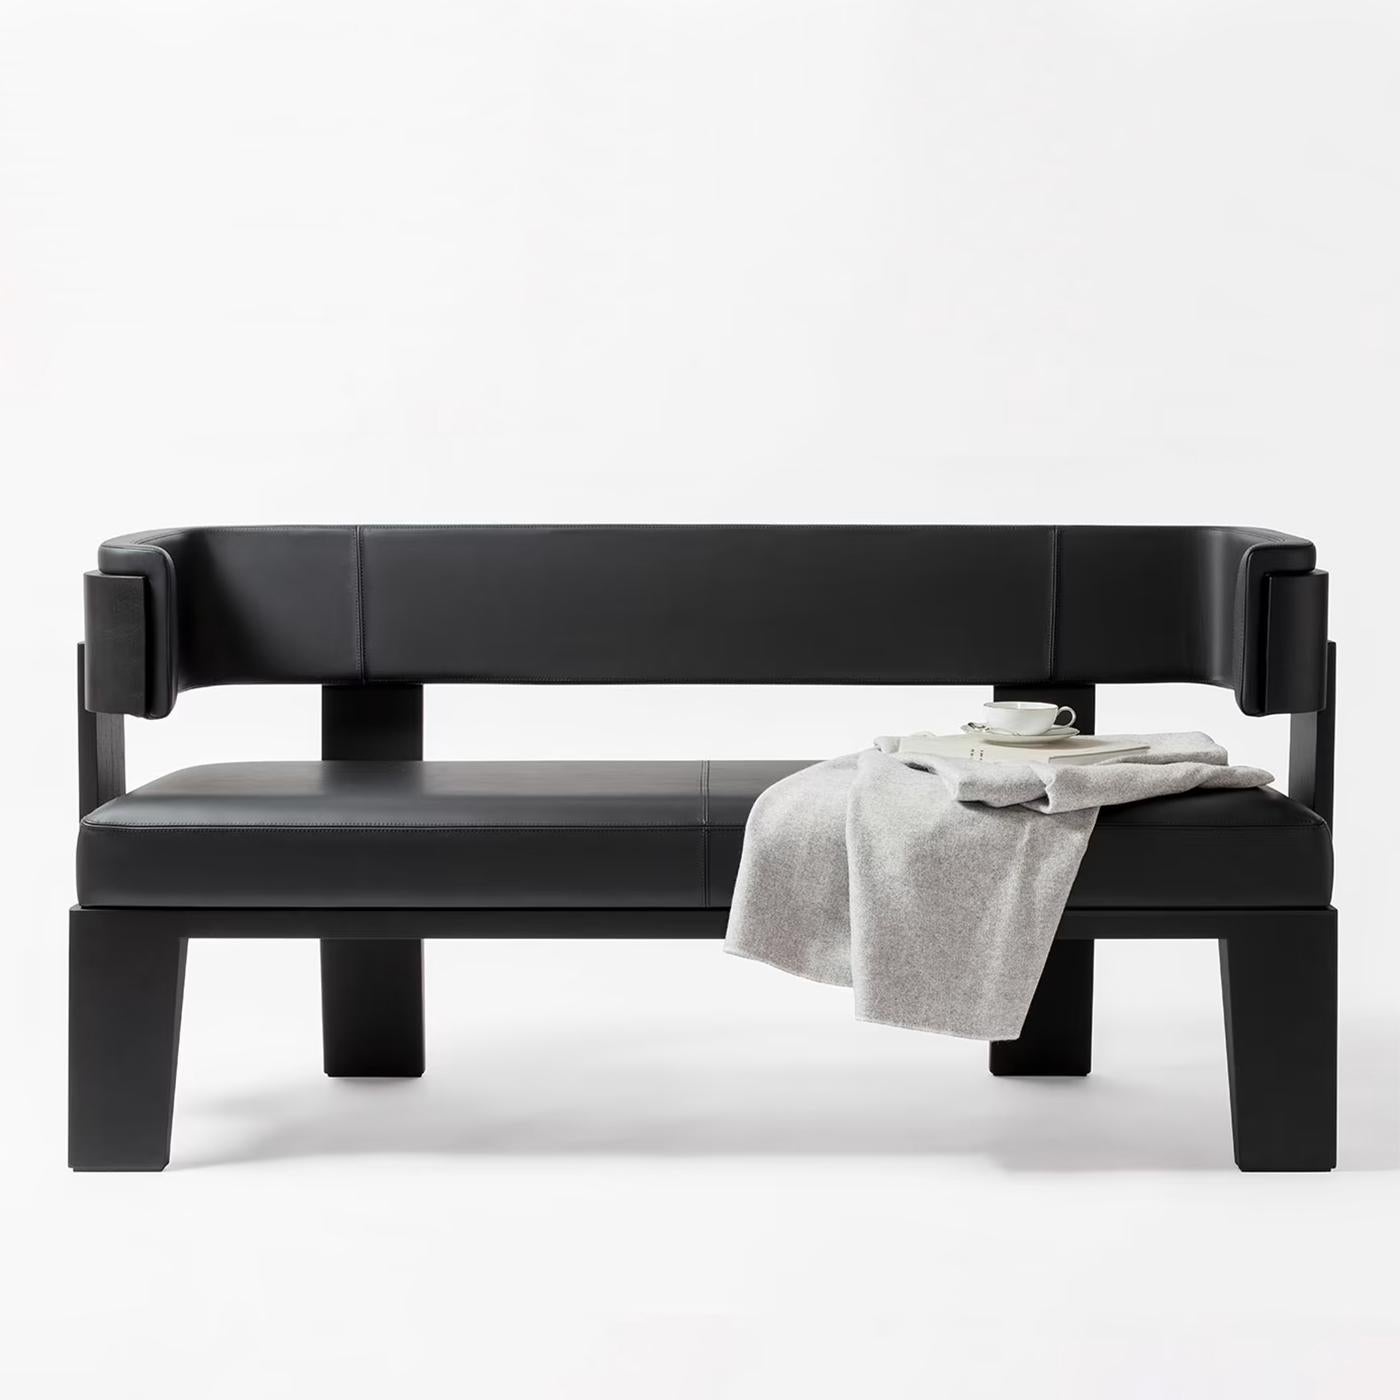 Bench Eloise black with solid wood structure in stained.
Wenge finish, upholstered and covered with high quality. 
Genuine black leather.